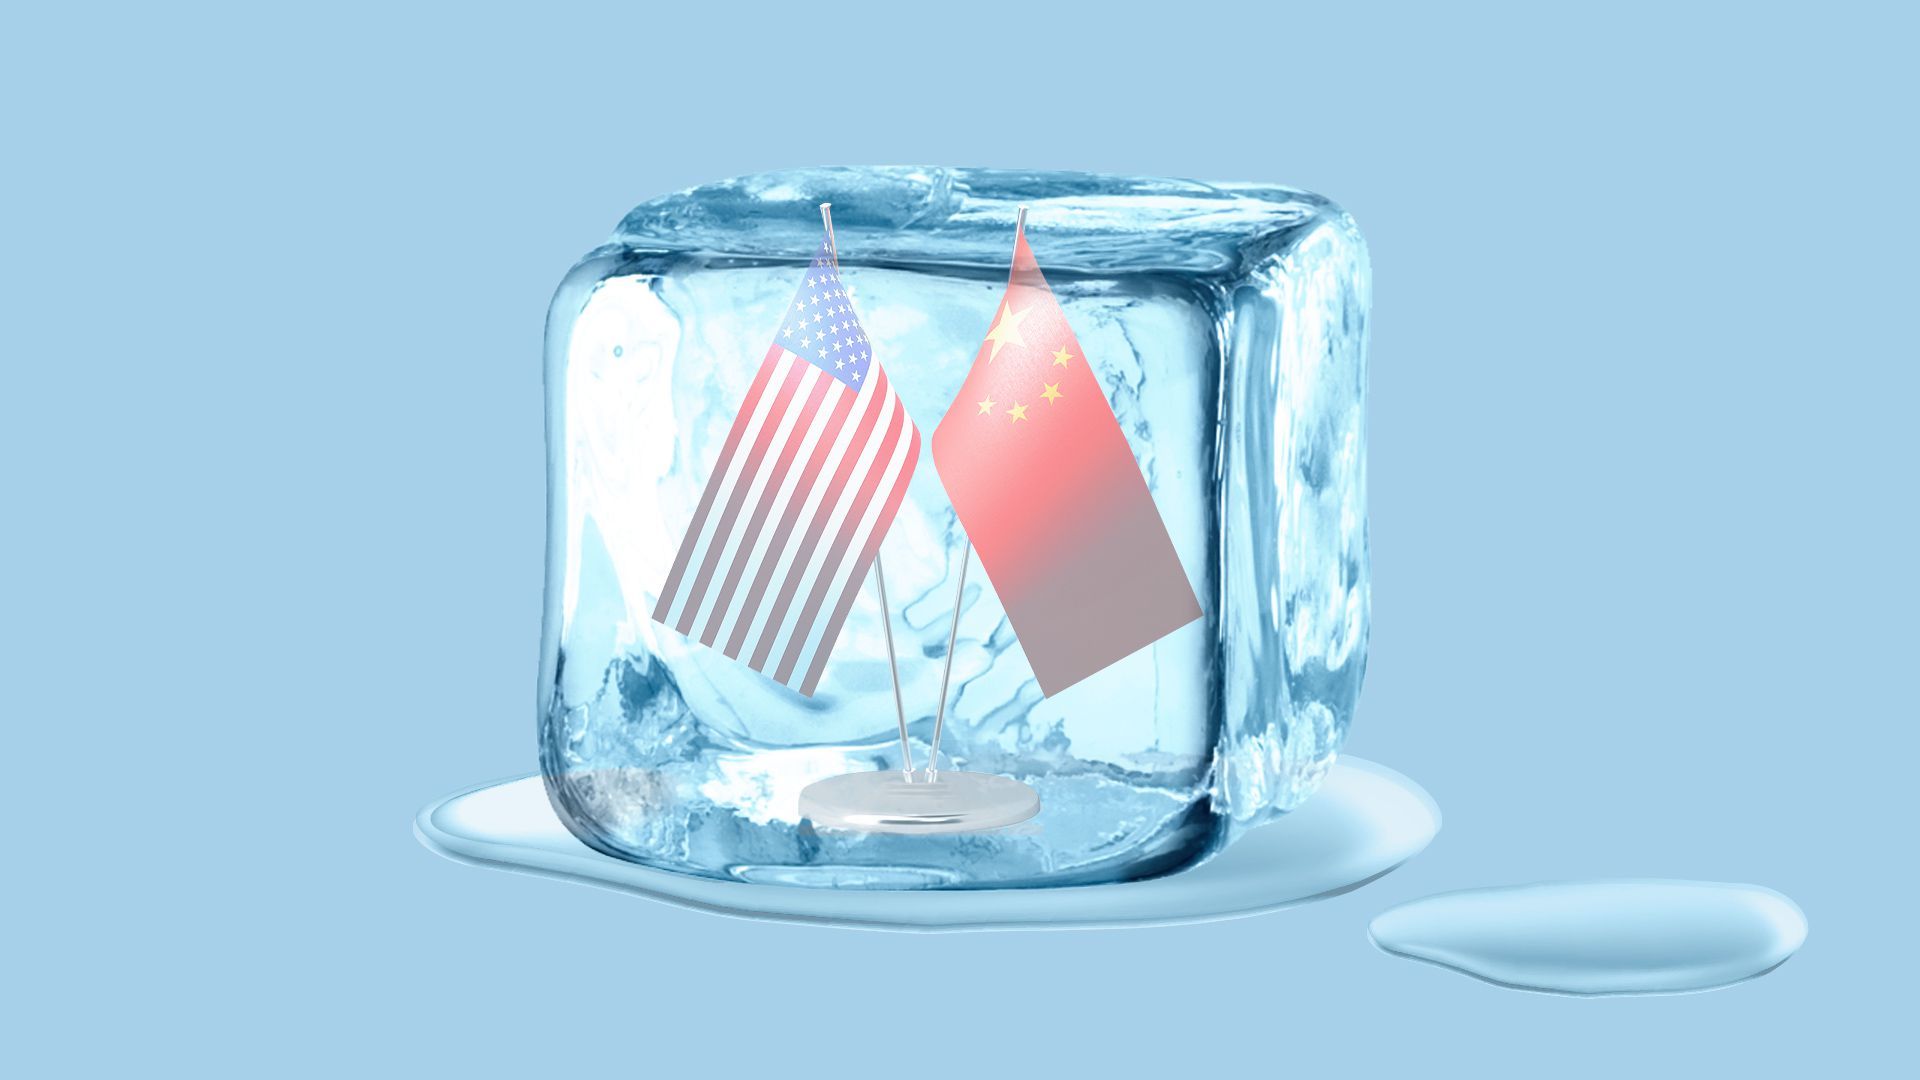 Illustration of the American and Chinese flags frozen in an ice cube.